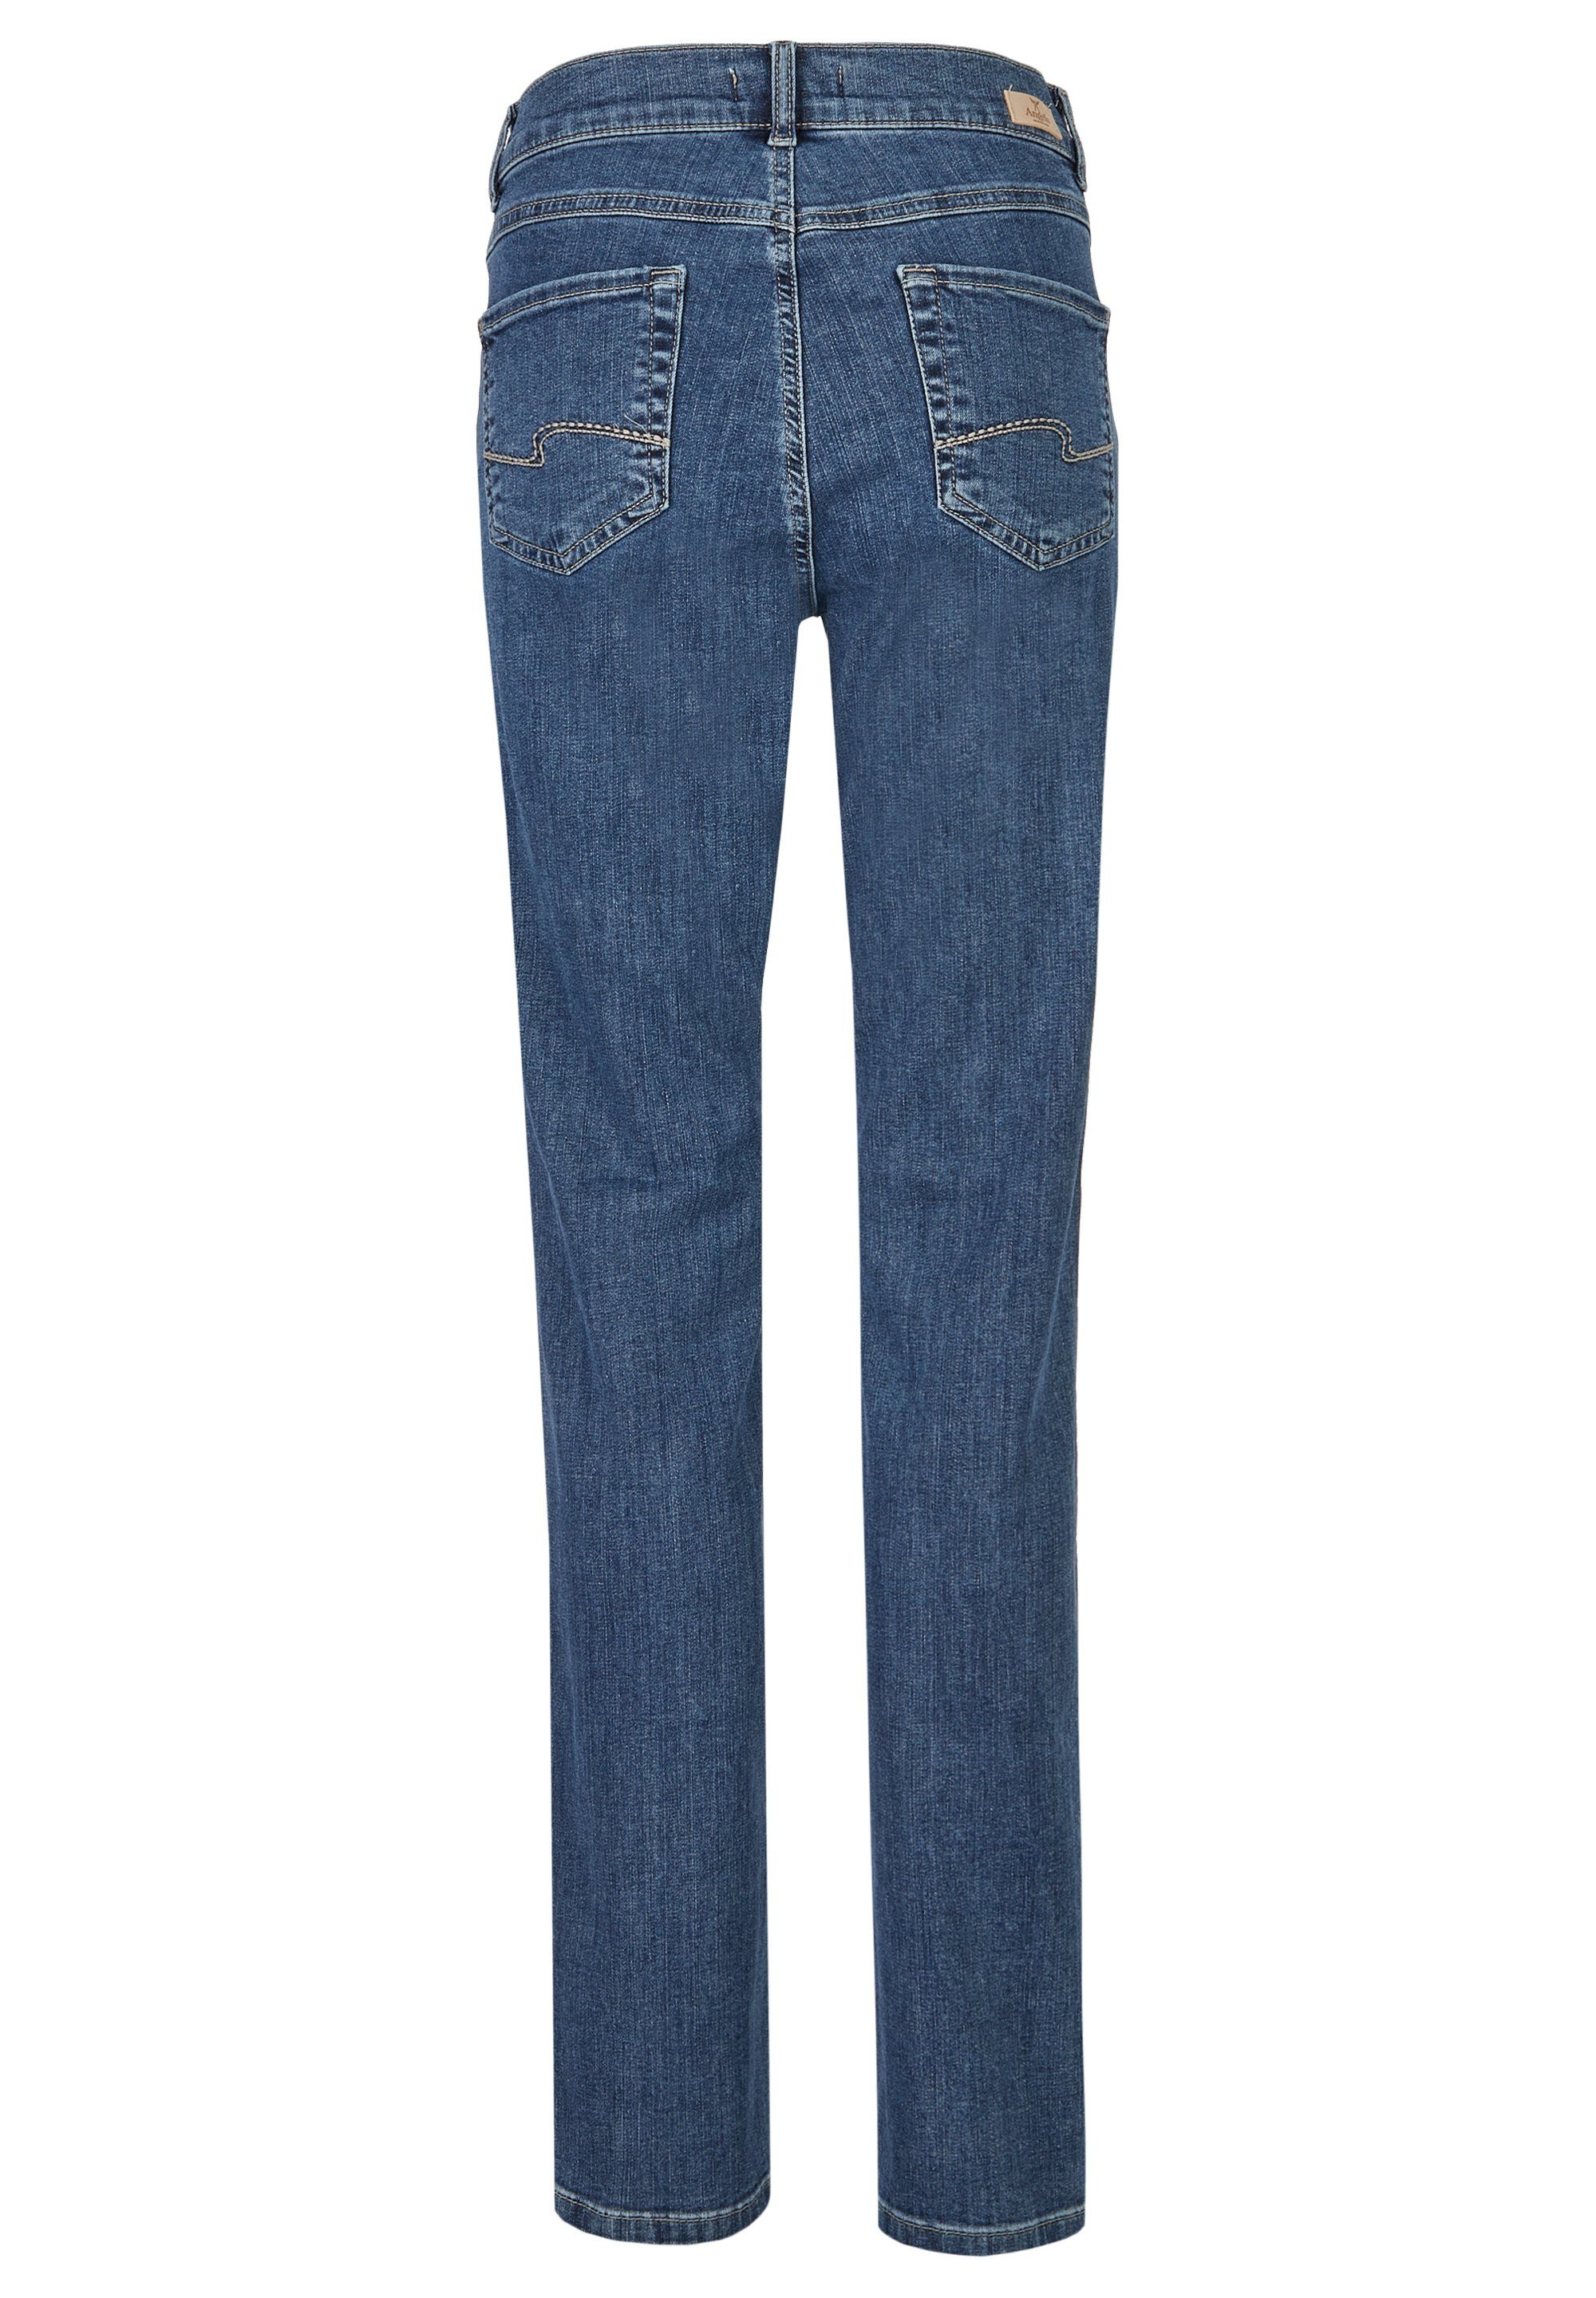 3400.33 - Stretch-Jeans ANGELS JEANS CICI STRETCH blue 346 mid ANGELS